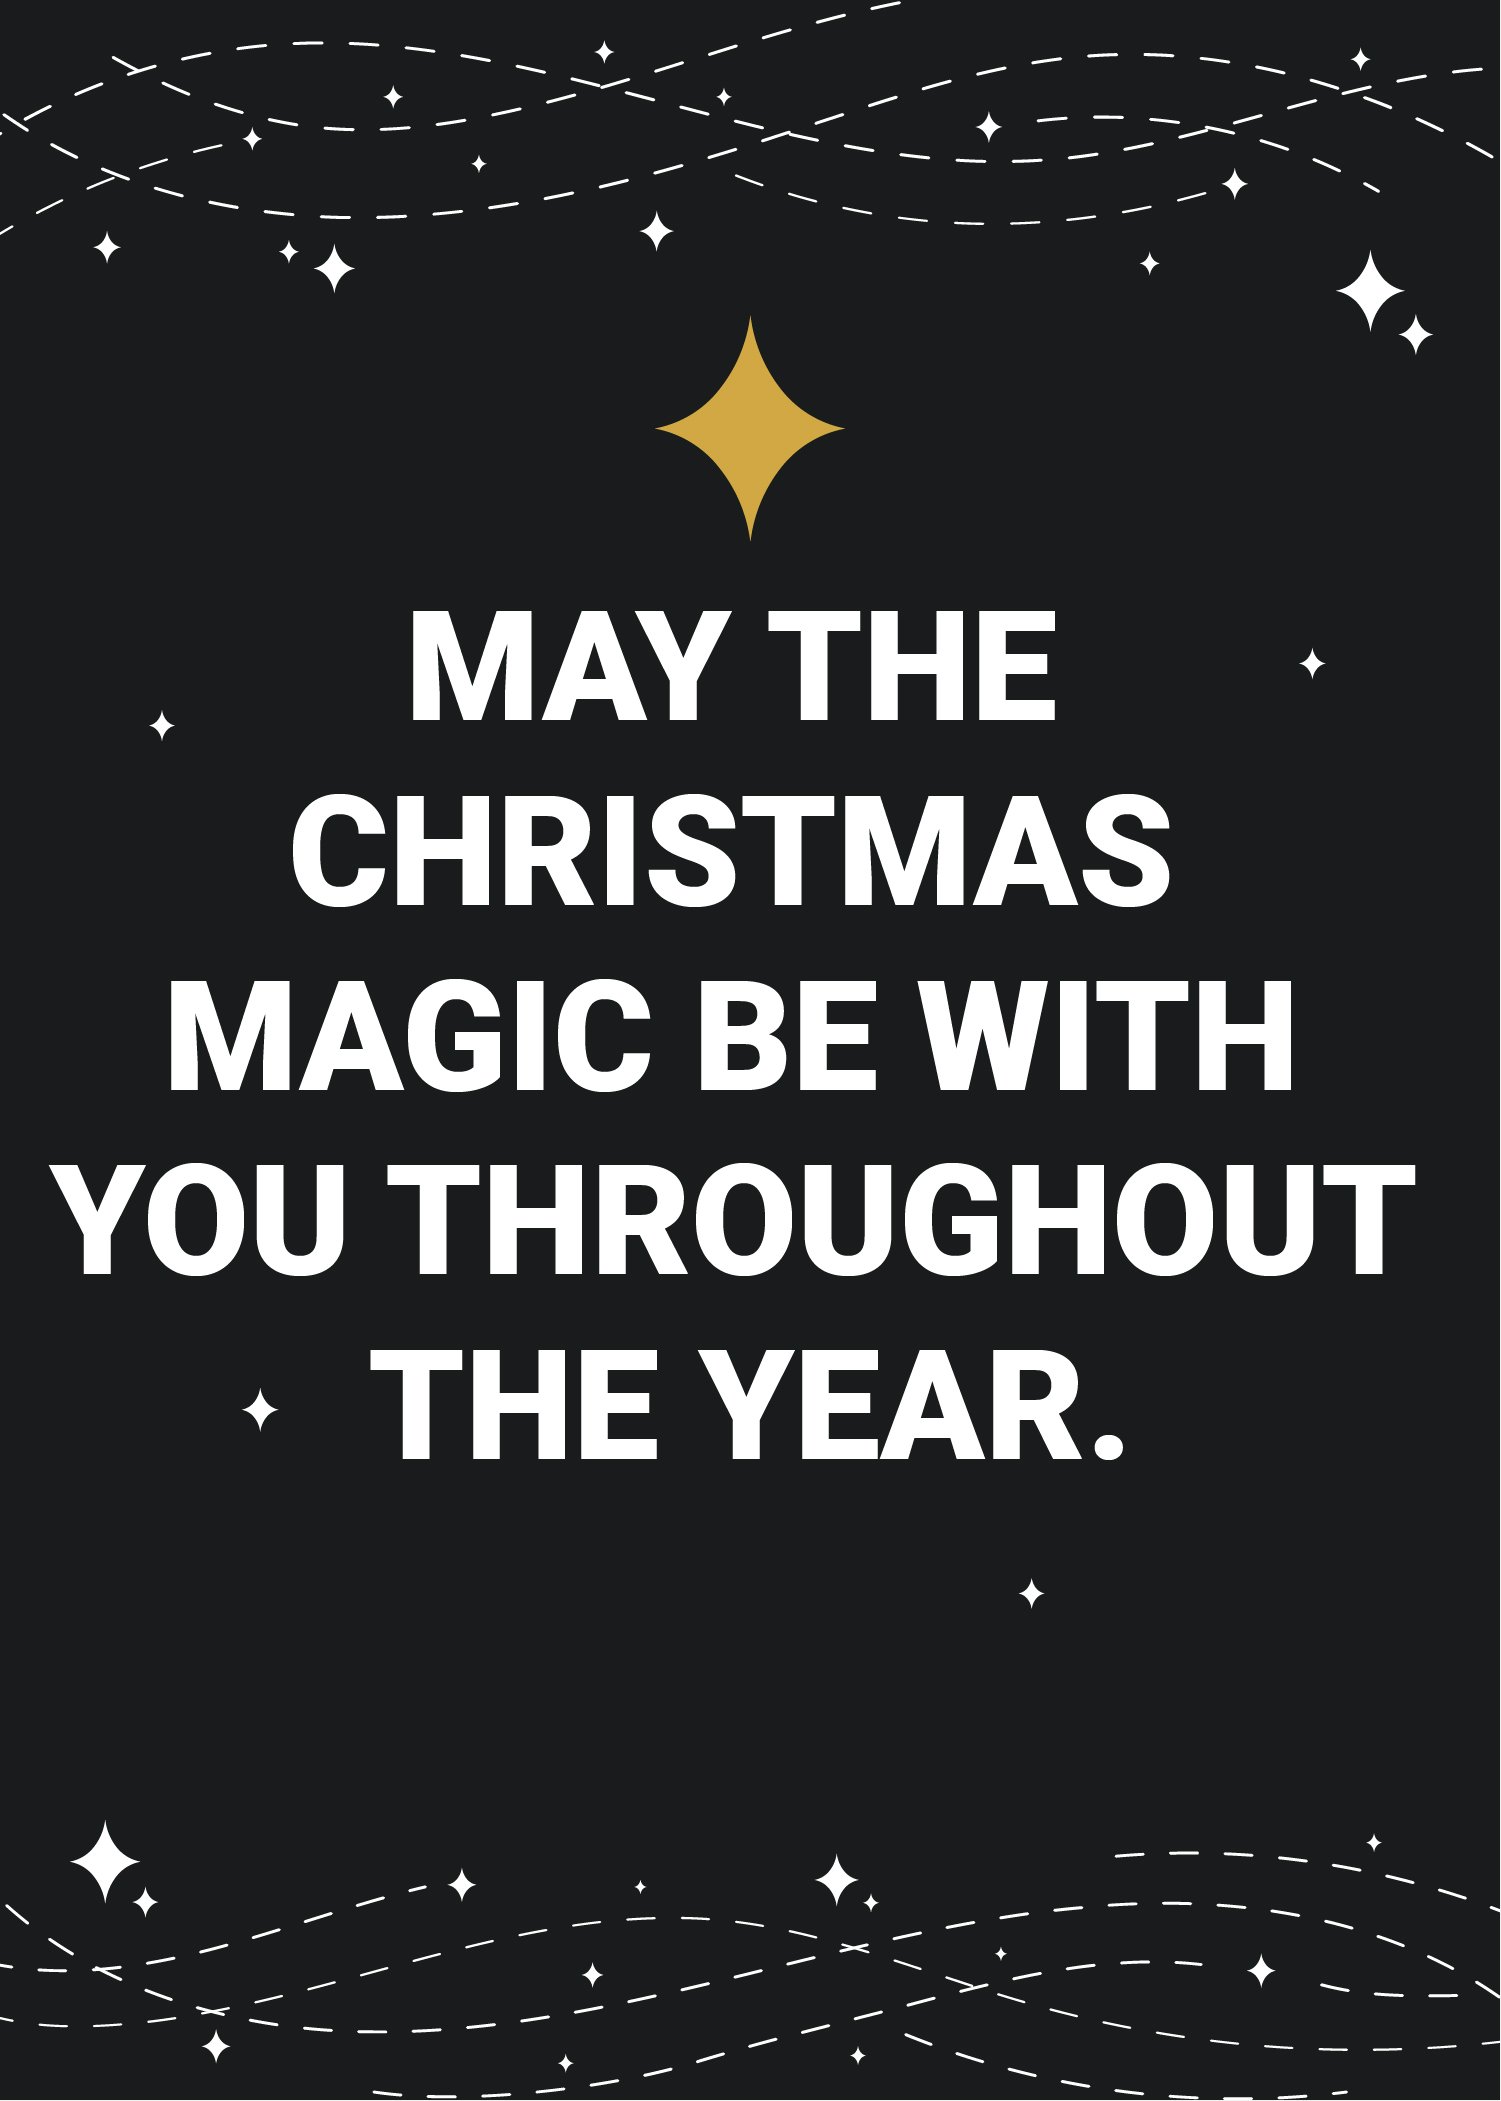 Free Christmas Message in Word, Google Docs, Illustrator, PSD, Apple Pages, Publisher, EPS, SVG, JPG, PNG